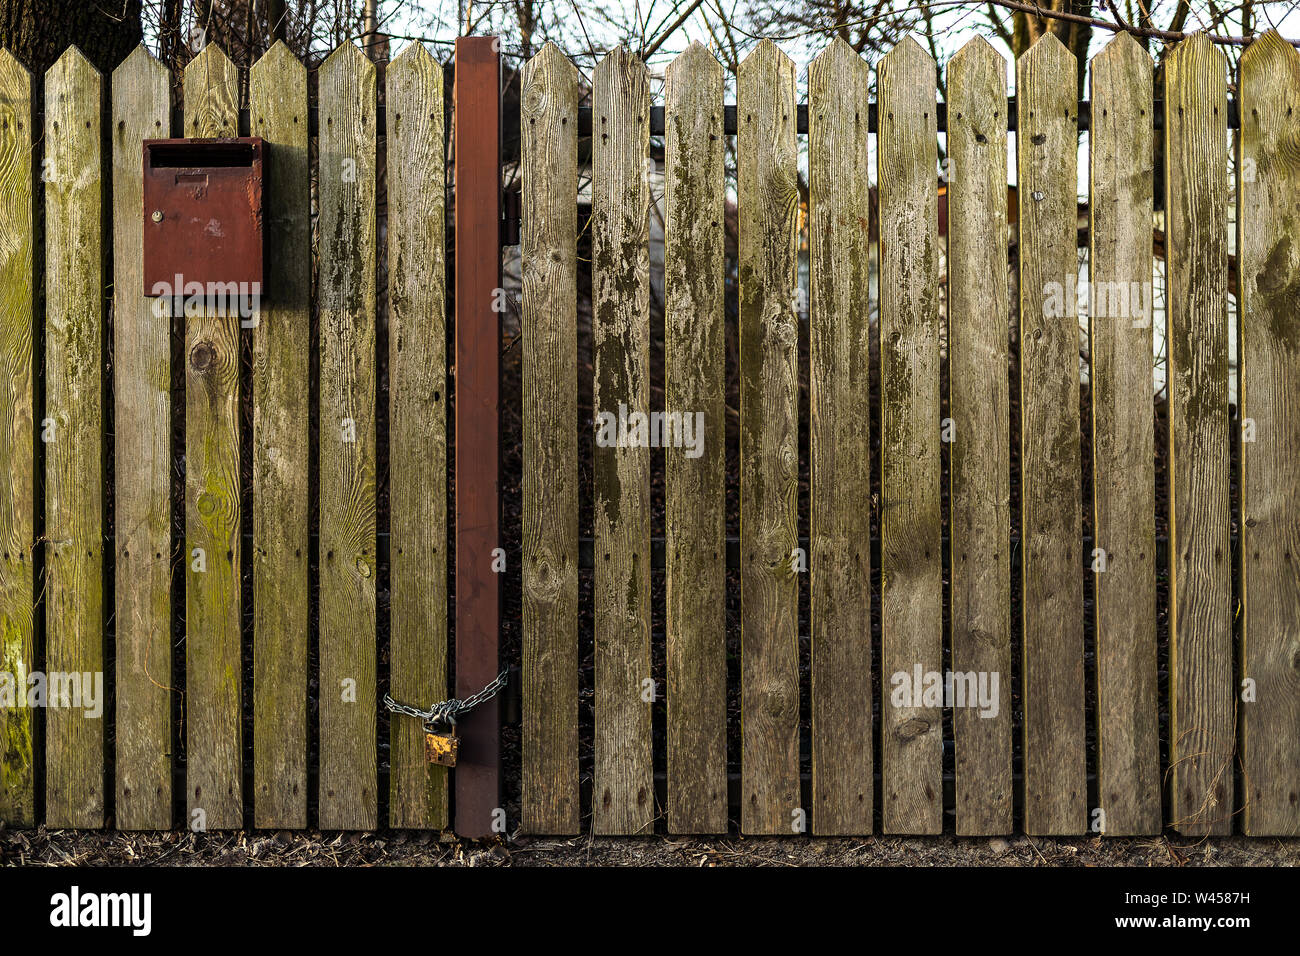 Wooden fence with a letterbox. Chain with a padlock. Waiting for a message. Stock Photo